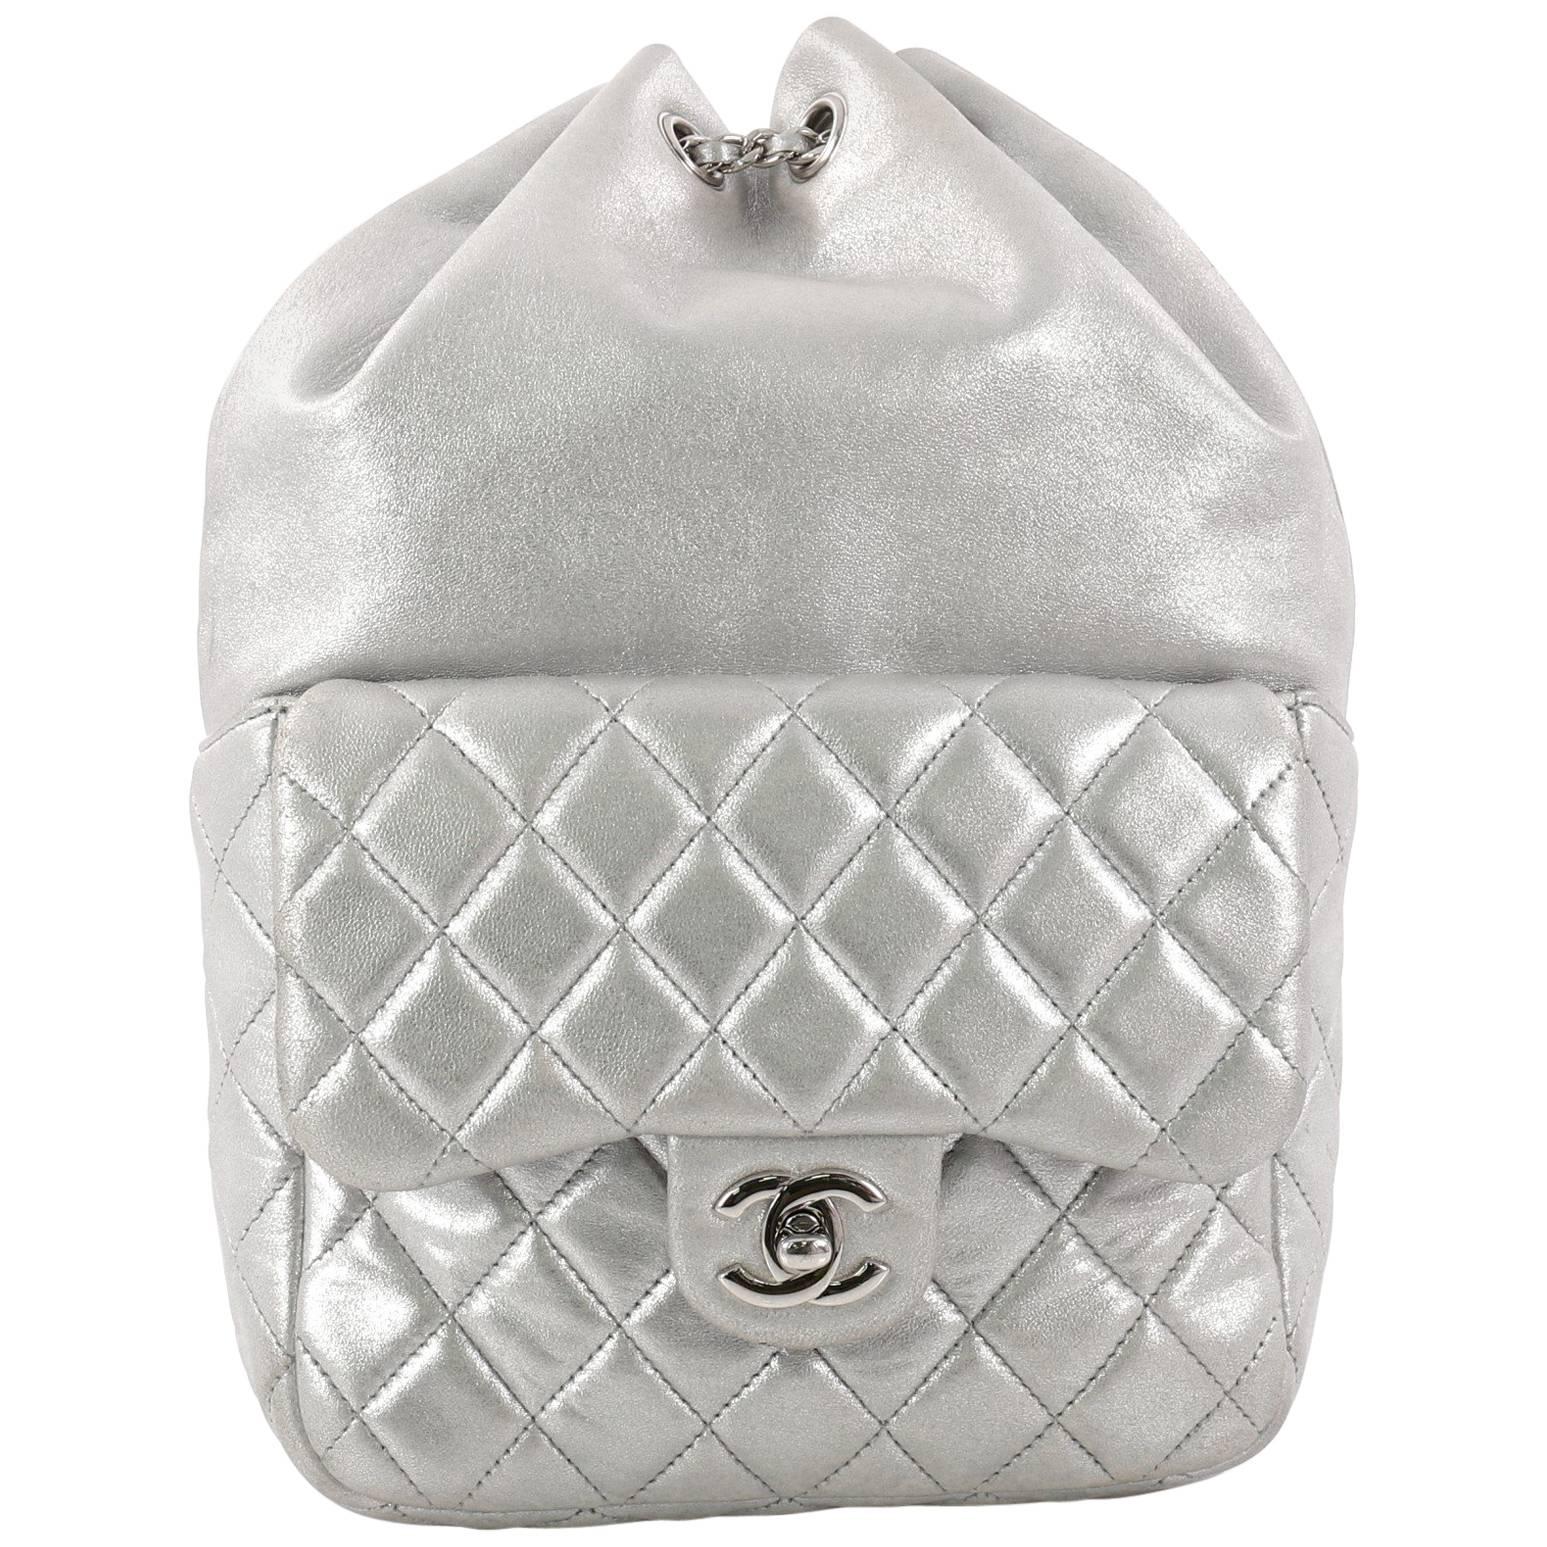 Chanel Pink Lambskin 'Backpack in Seoul' Small Q6BCSZ1IPH000